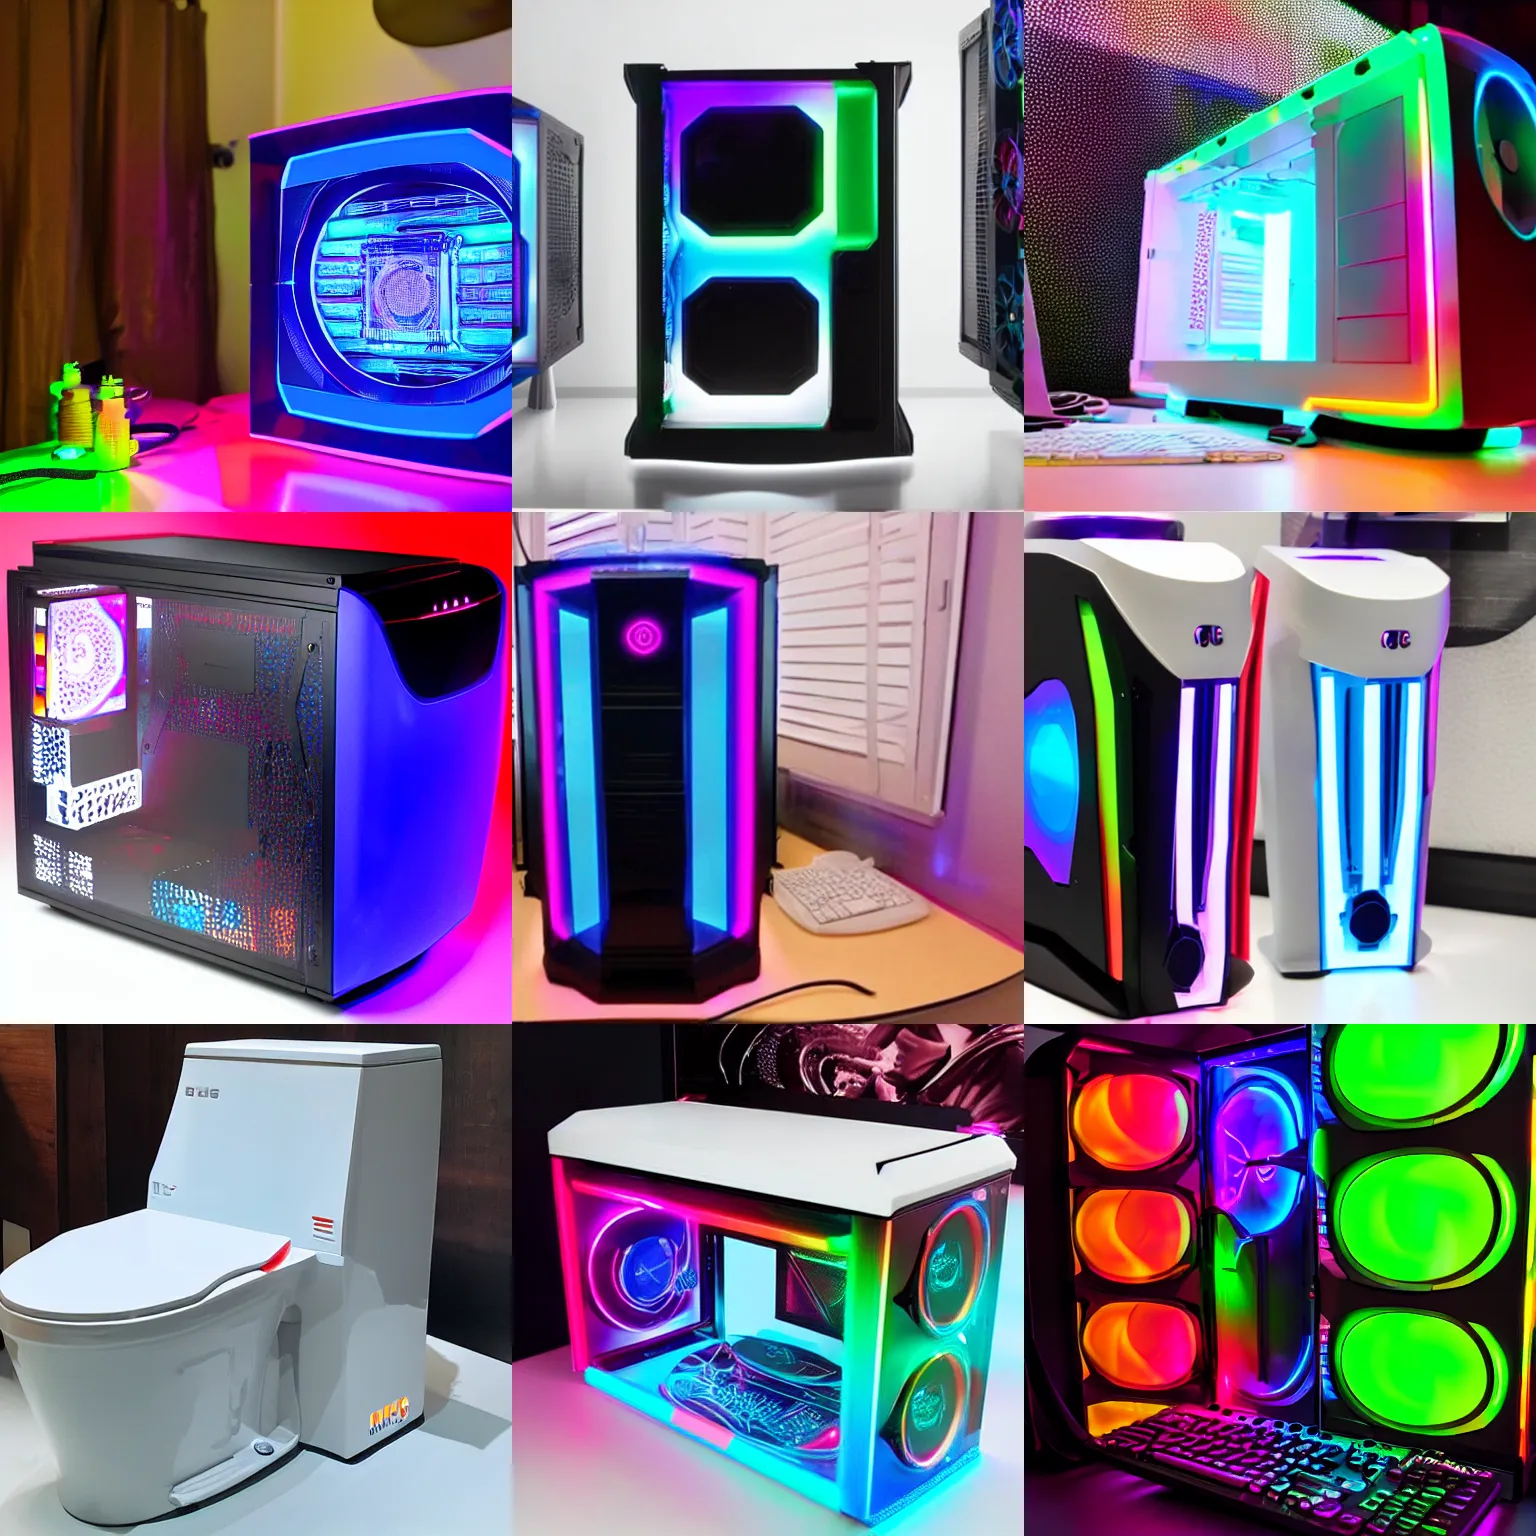 Someone has made a gaming PC from a toilet